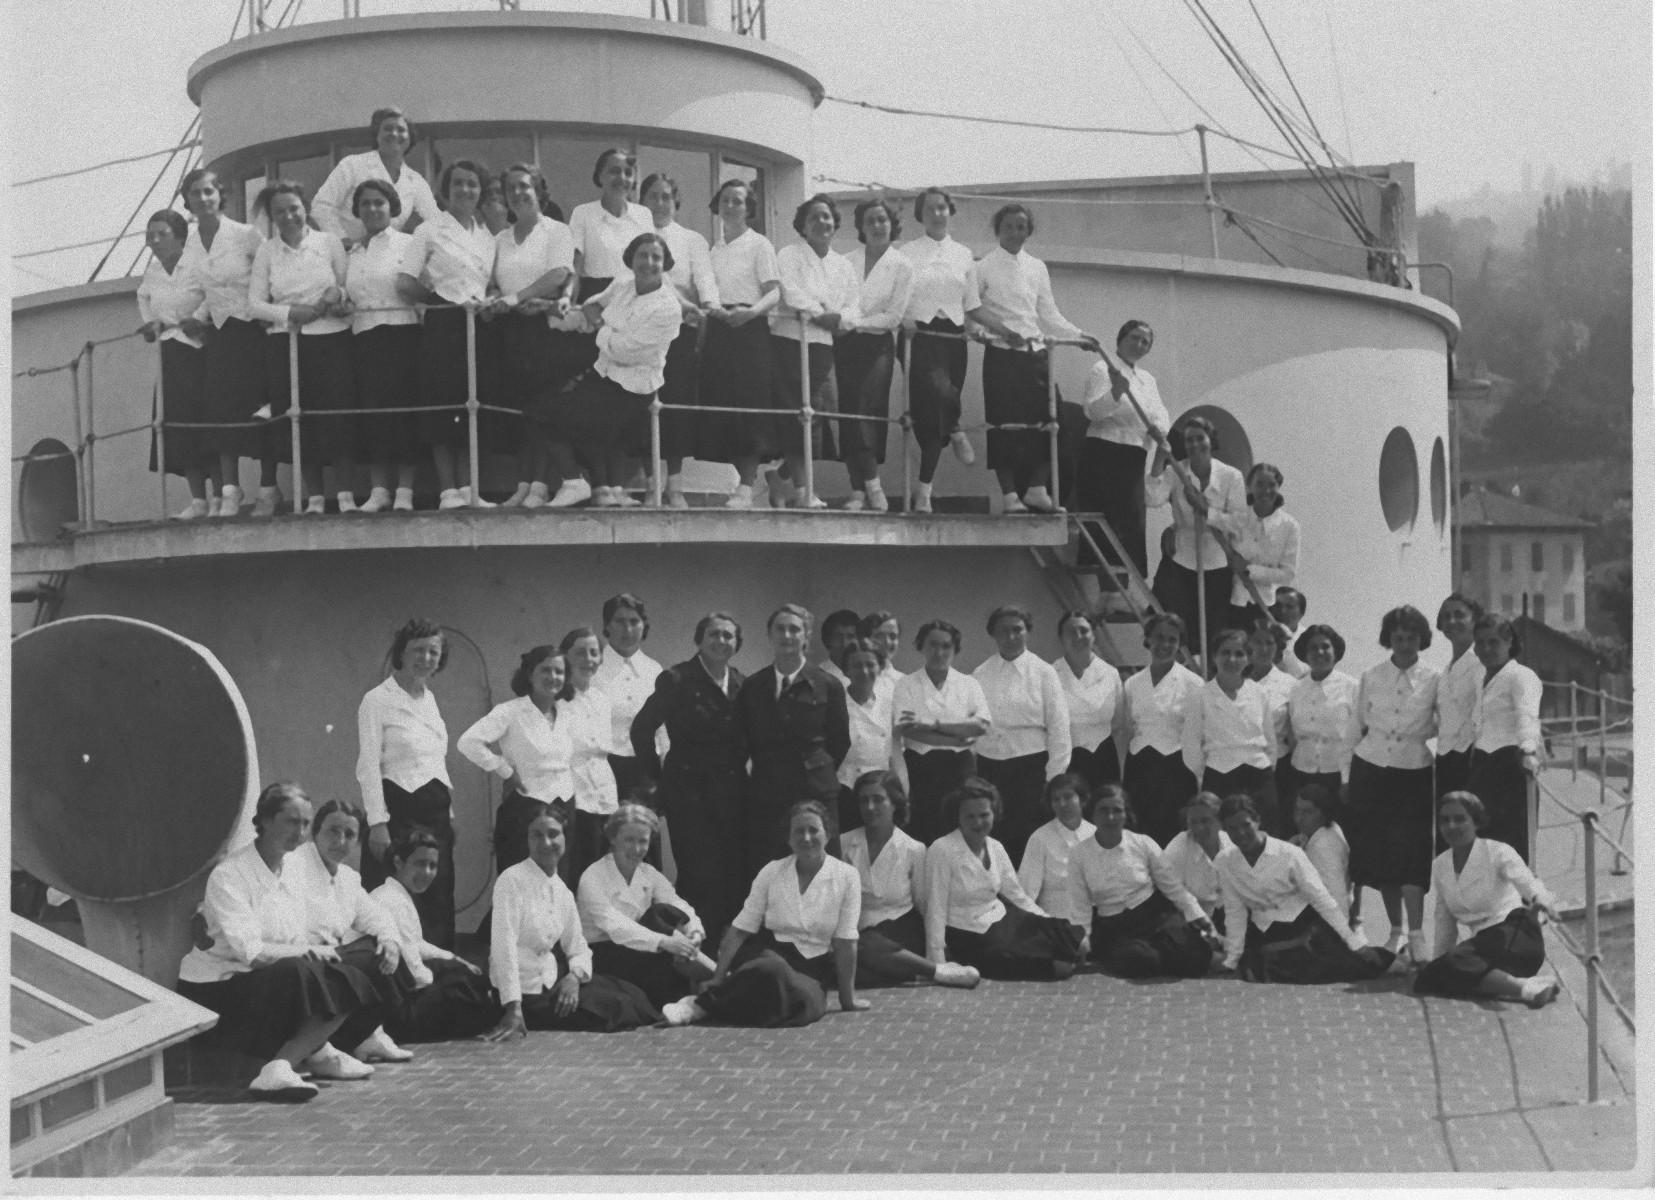 Unknown Portrait Photograph - Fascism Period in Italy - Women Posing on a Boat - Vintage b/w Photo - 1934